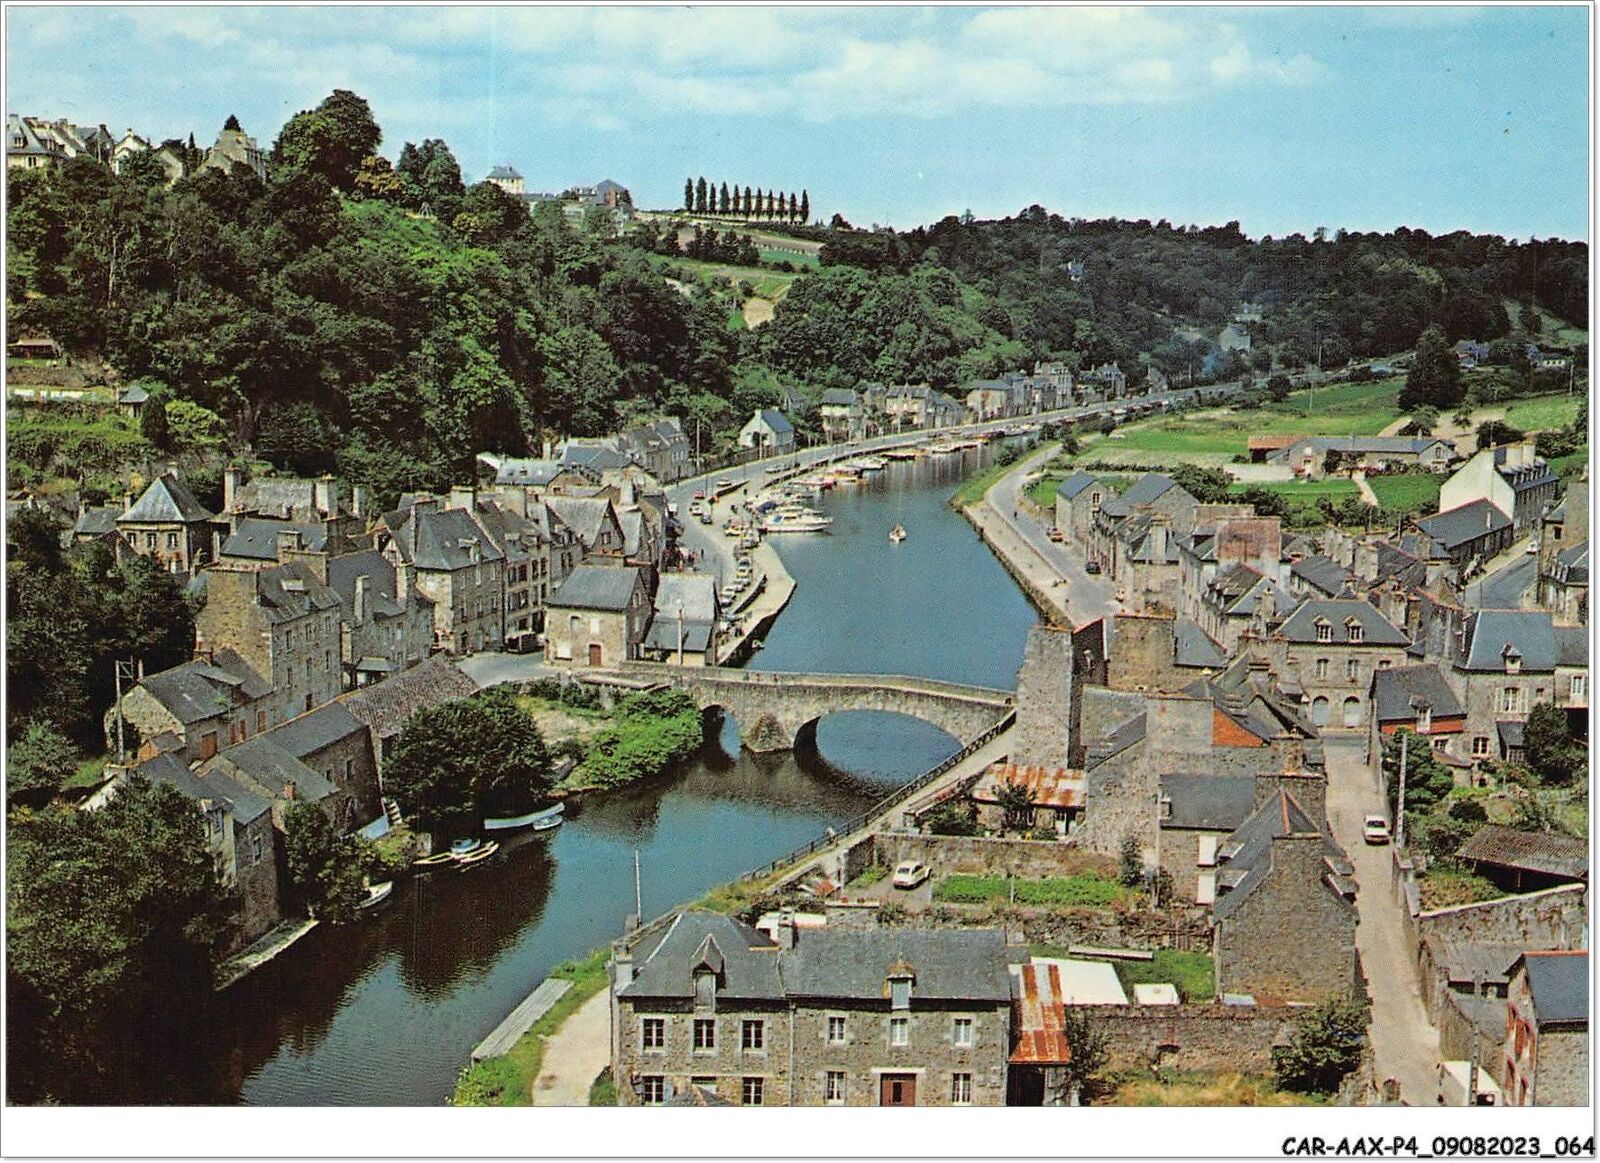 CAR-AAX-P4-22-0237 - DINAN - the old bridge over the rancid and general view